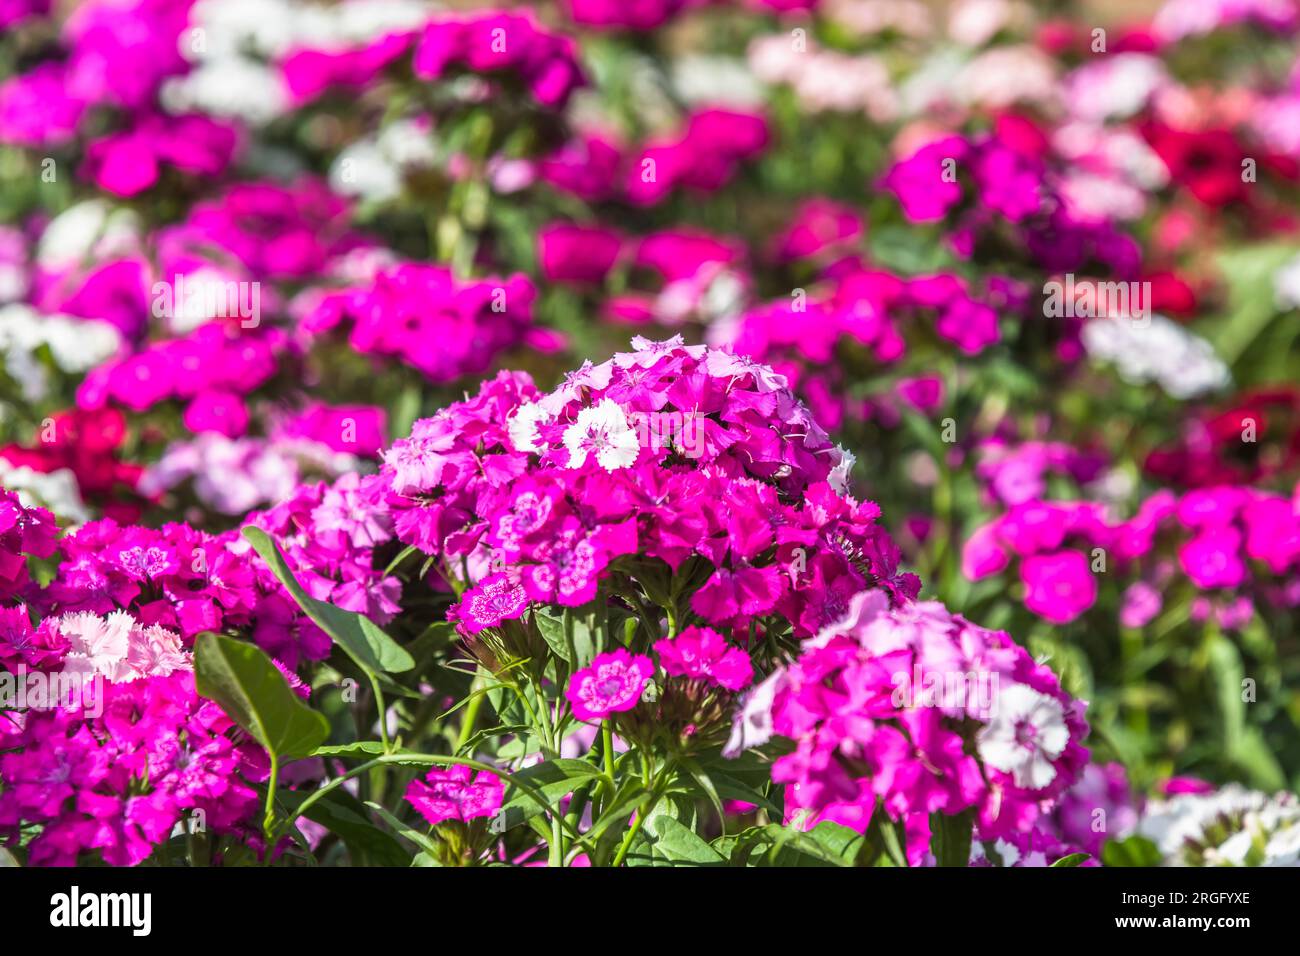 Bed of Dianthus Barbatus, called sweet William, flowers in pink, purple and white colors, close up Stock Photo